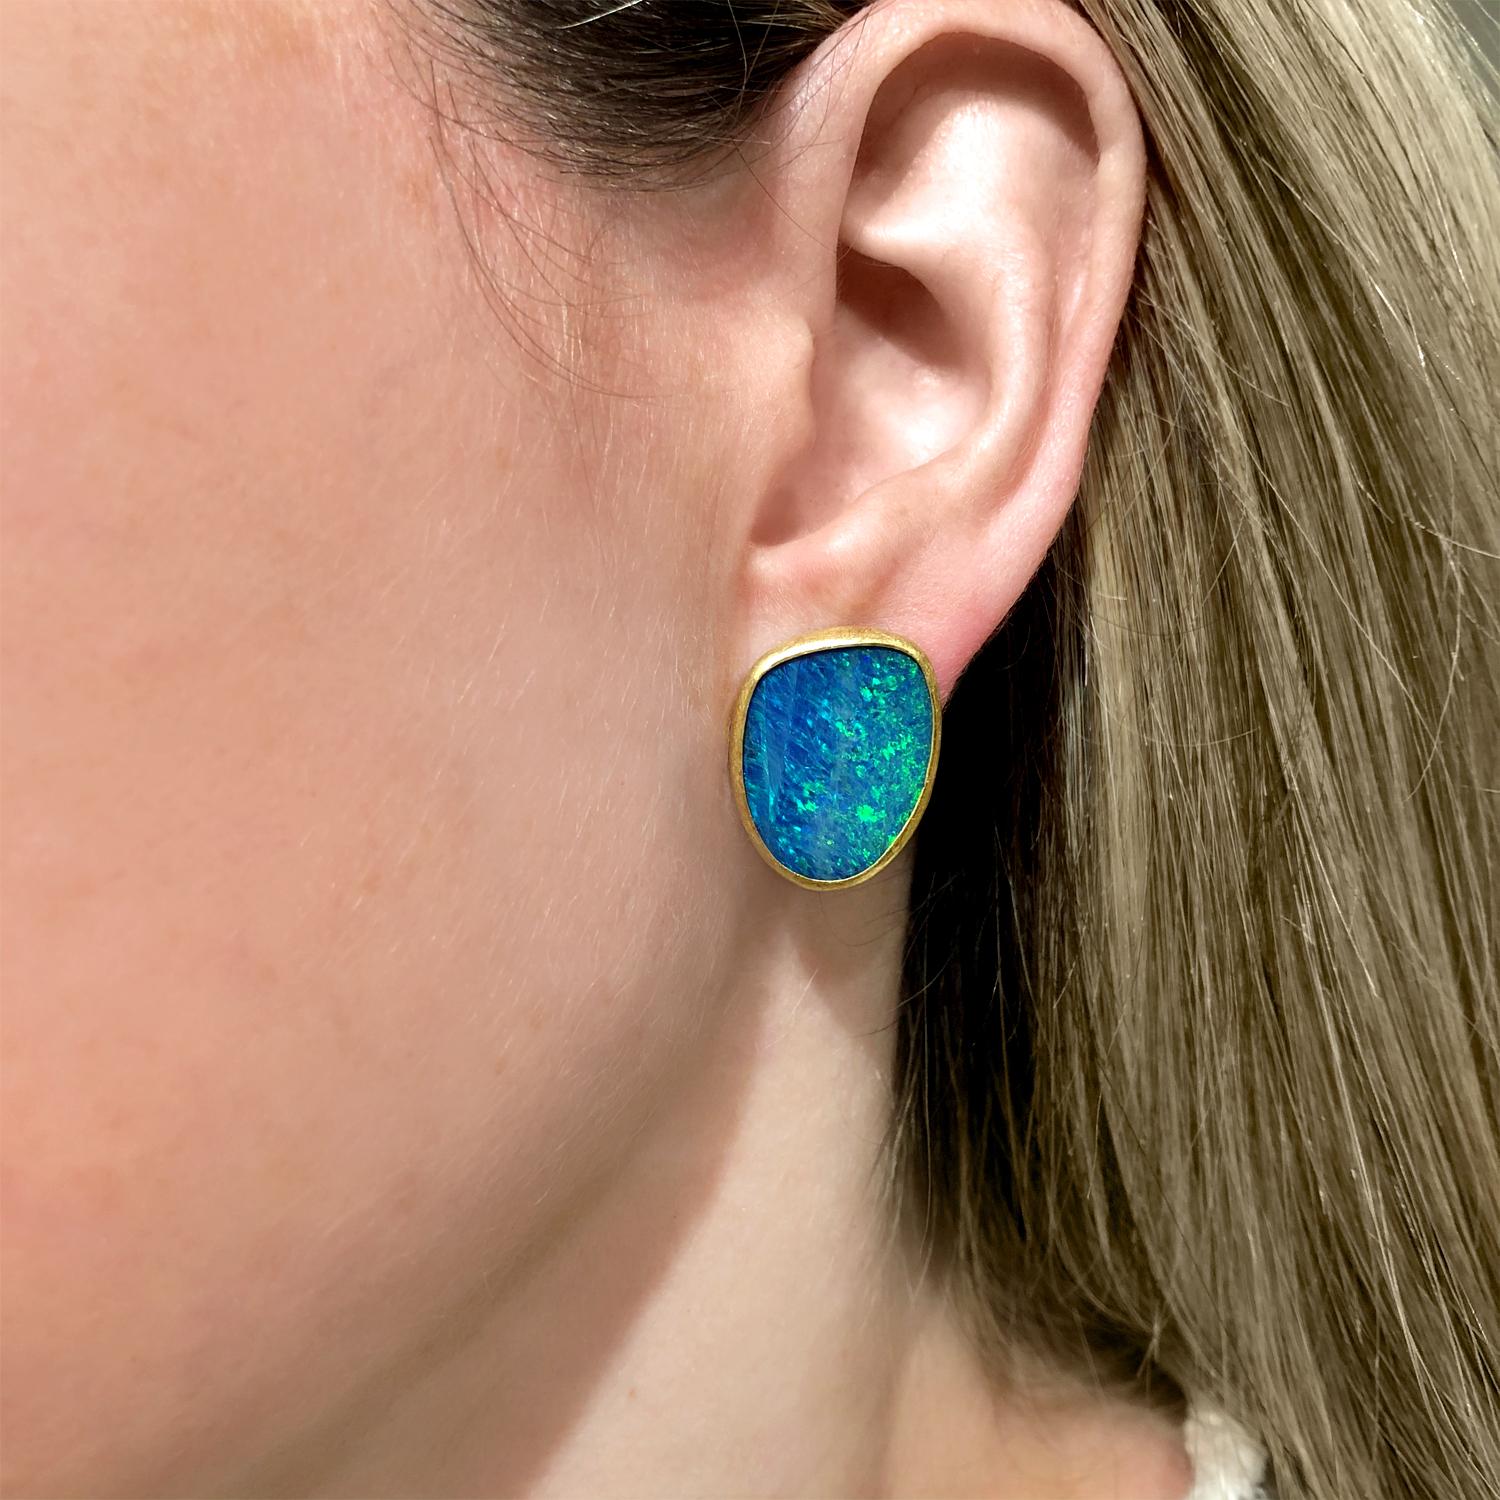 Large Stud Earrings handmade by acclaimed jewelry artist Petra Class in signature finely-textured 22k yellow gold featuring a beautifully matched pair of fiery Australian opal doublets primary flashes of strong neon green and flickers of violet,